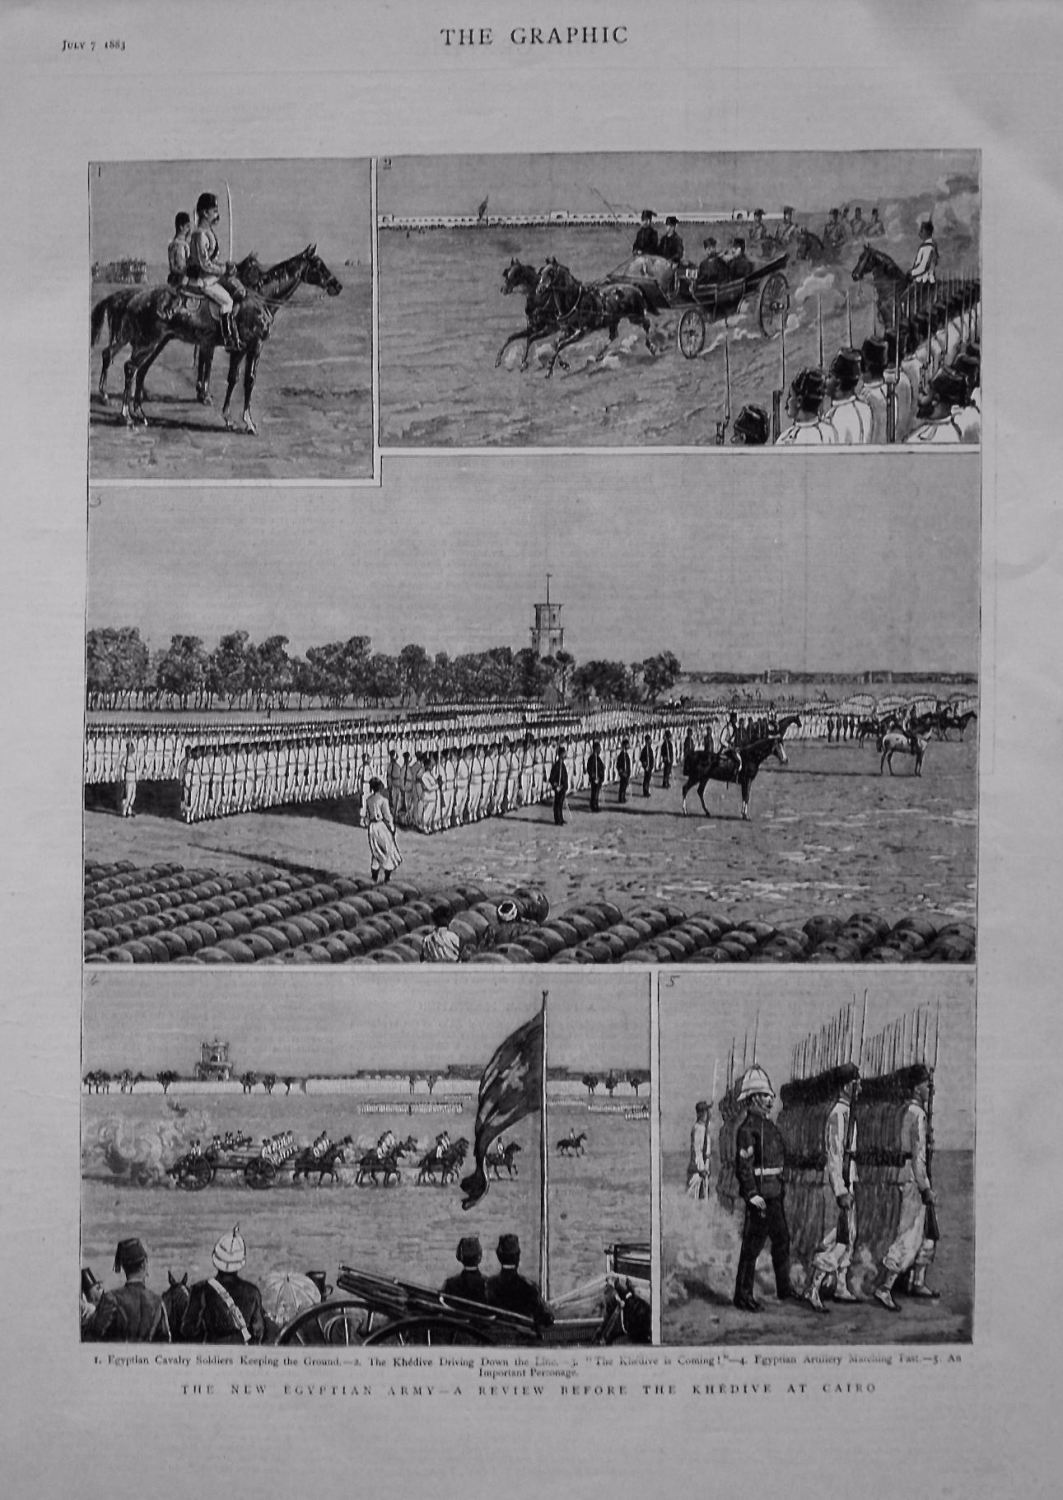 New Egyptian Army - A Review Before The Khedive at Cairo. 1883.